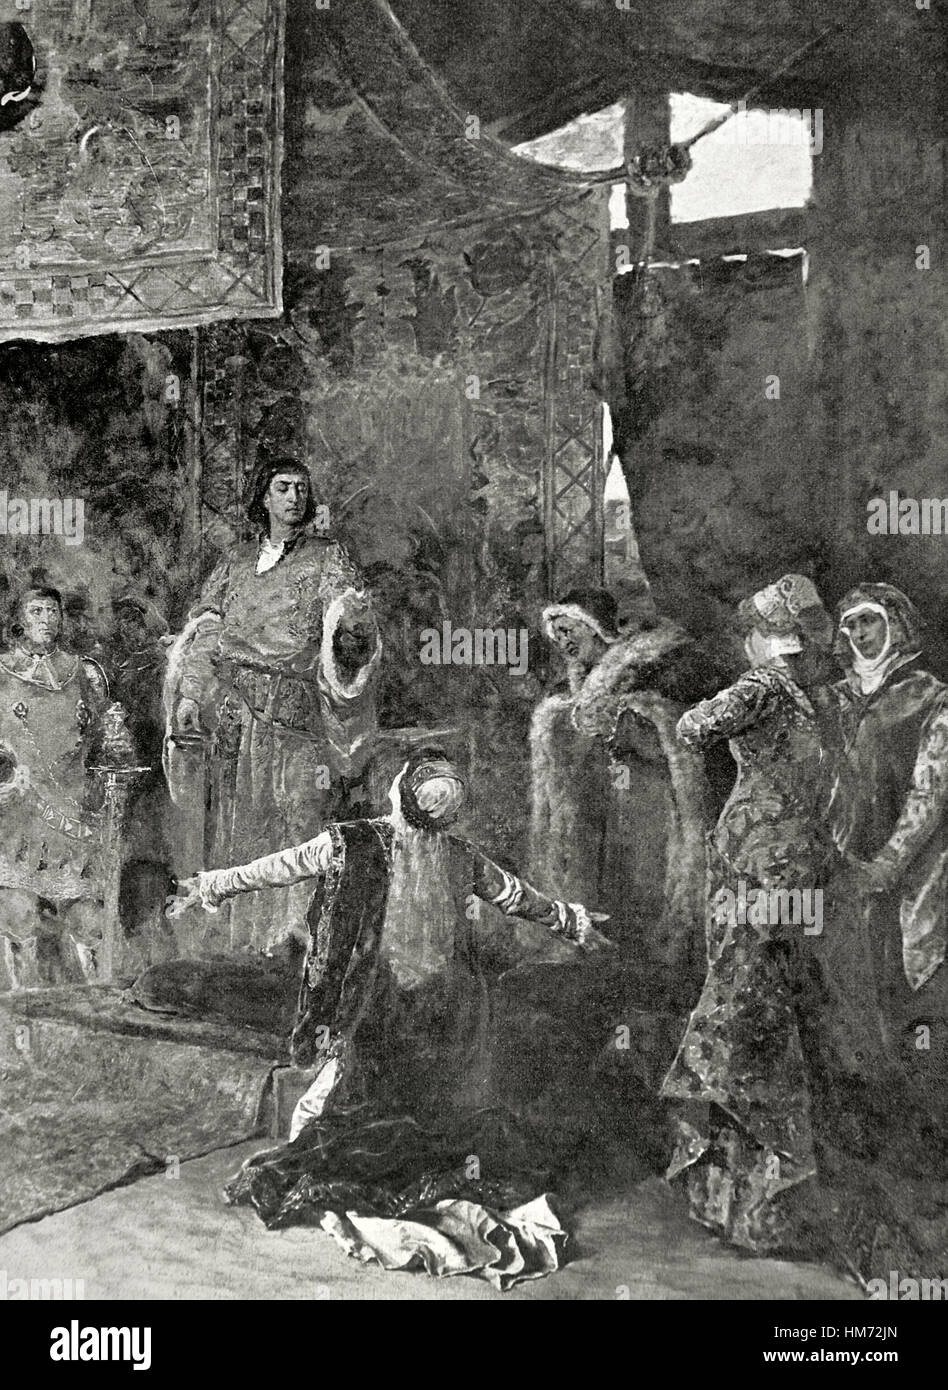 Ferdinand I of Aragon (1380-1416). King of Aragon and Count of Barcelona. The Countess of Urgell in the tent of King Ferdinand I asking for pity for her husband. Engraving after a painting by Ramon Tusquets. The Catalan Illustration, 1904. Stock Photo